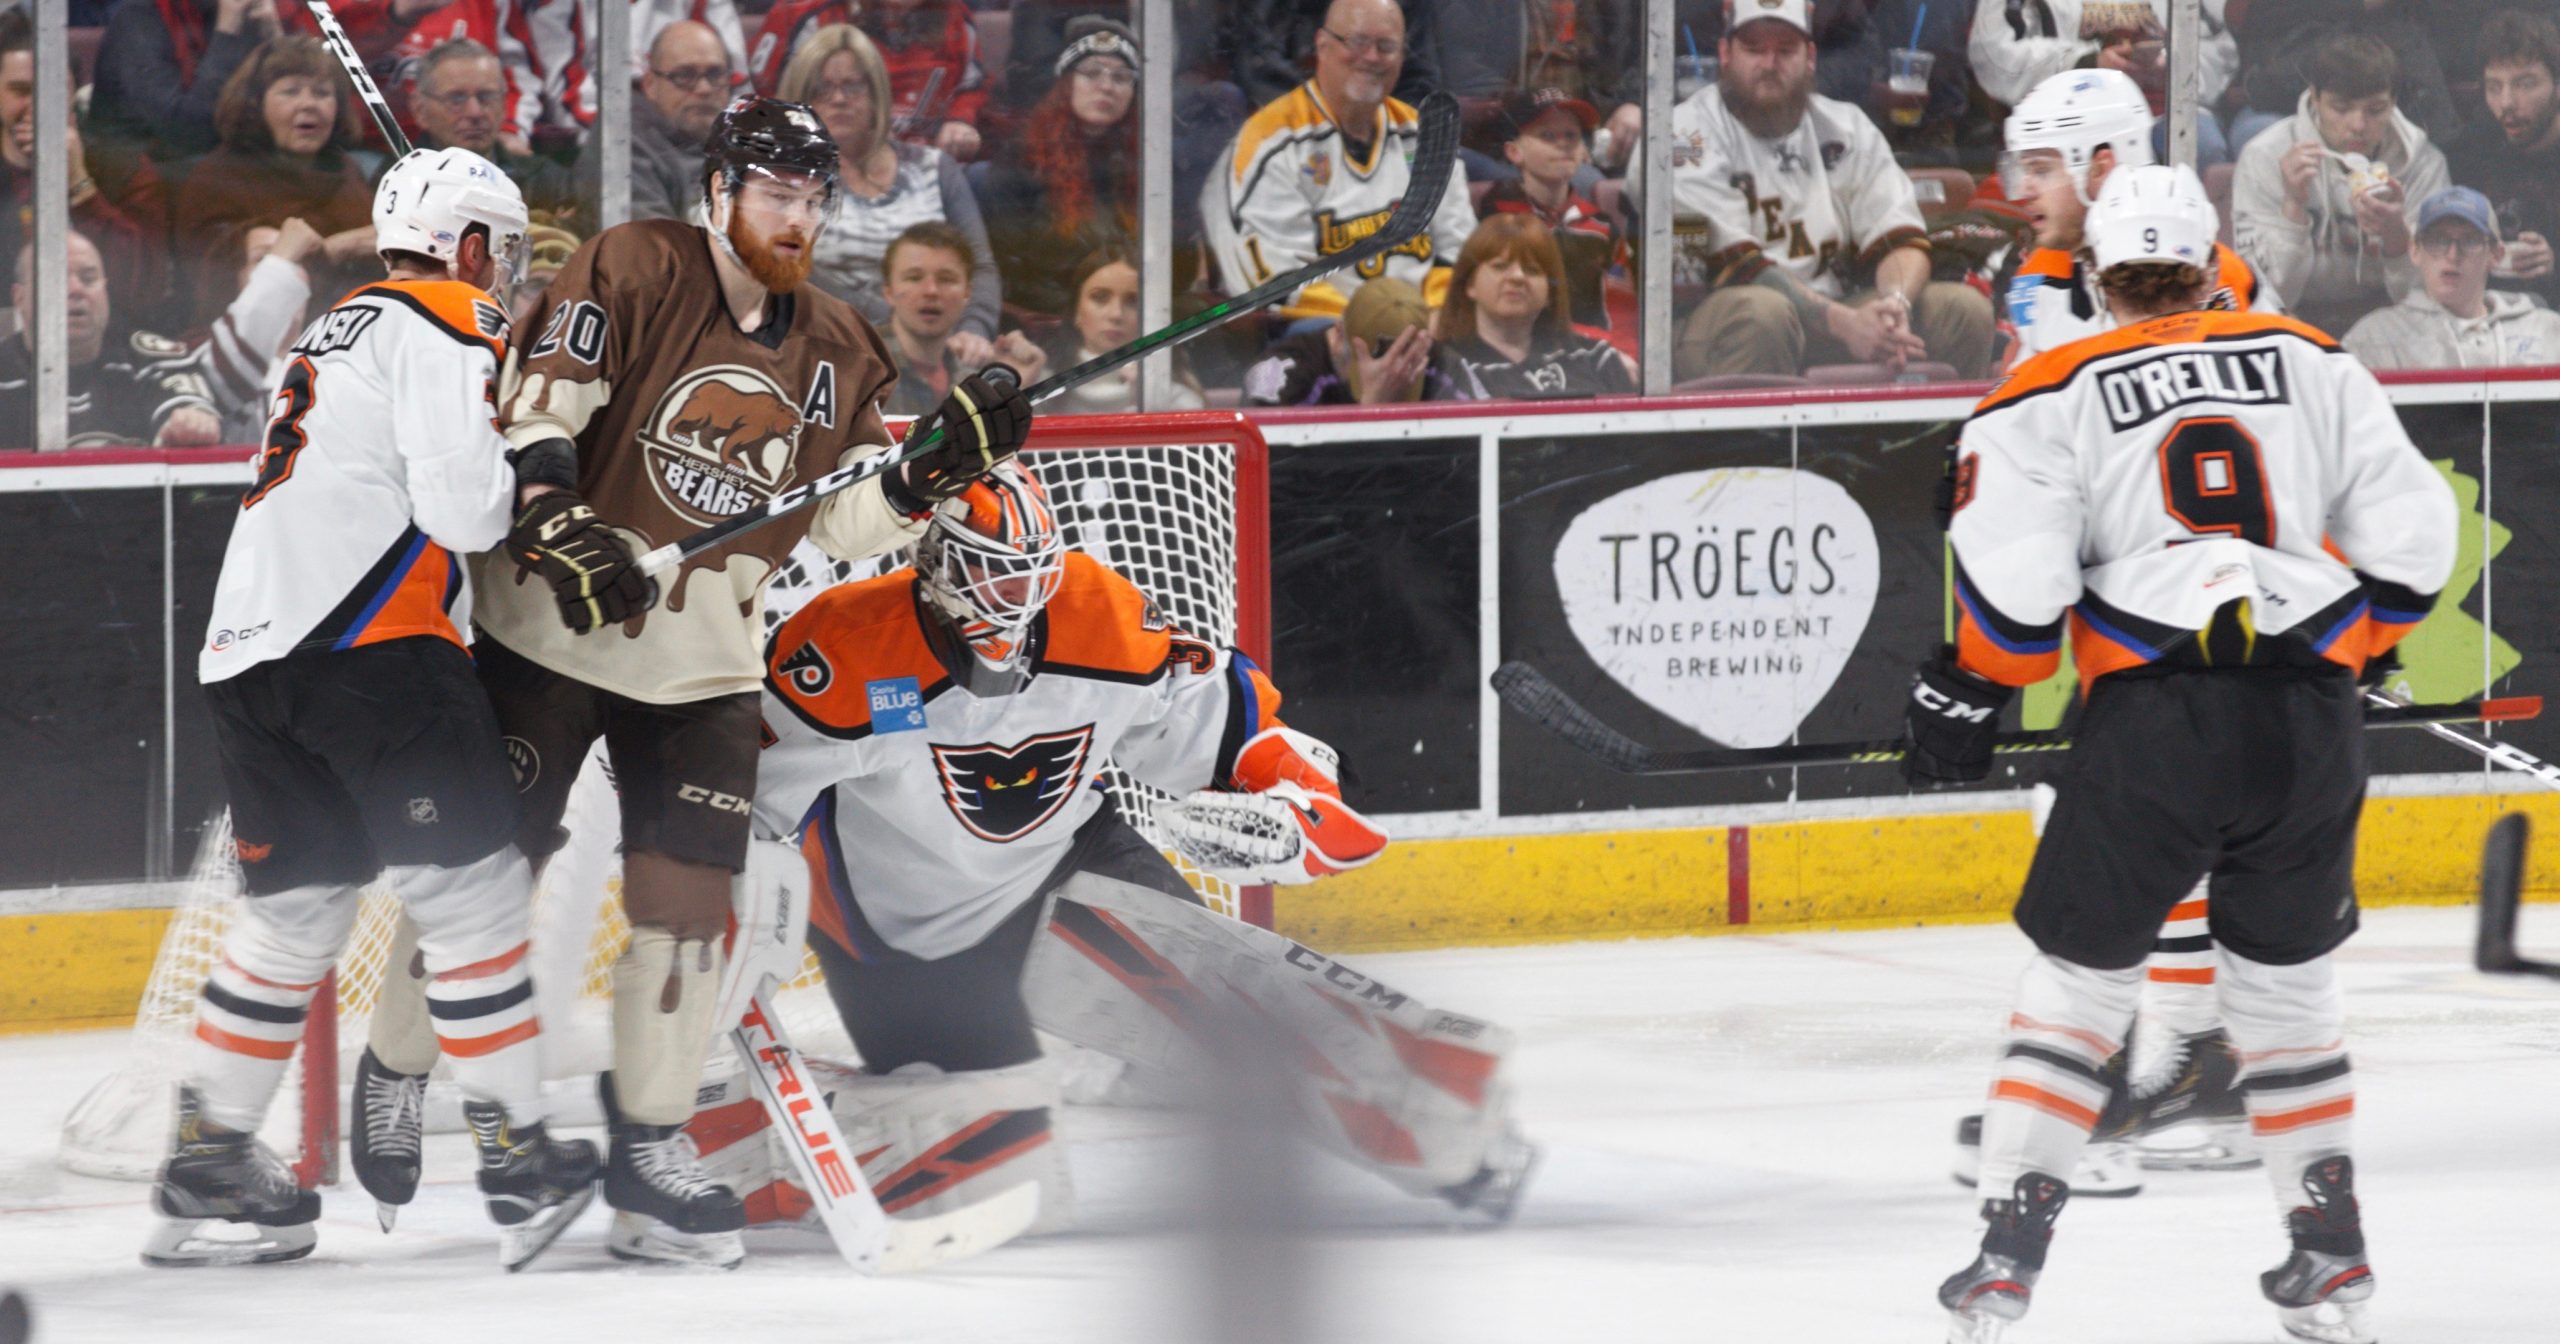 Bears Ghosted As They Fall 3-0 To Lehigh Valley